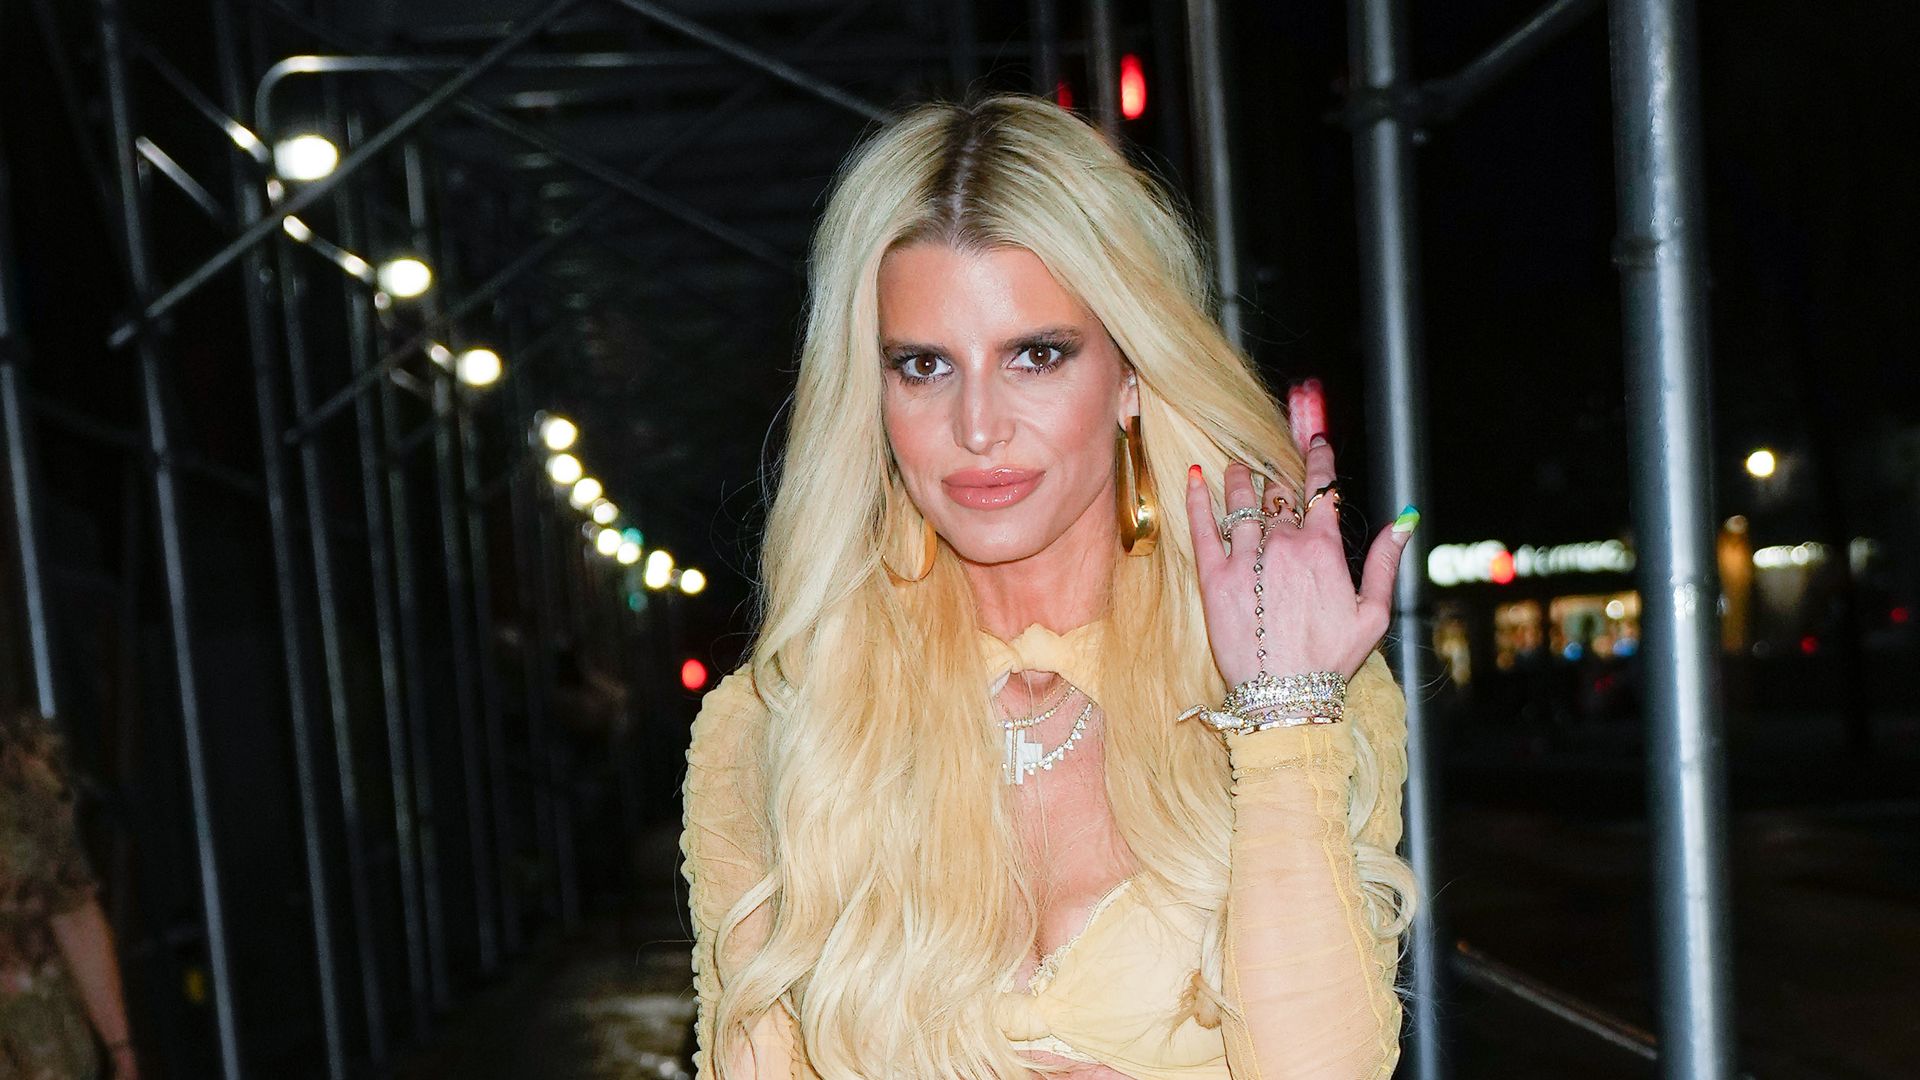 Jessica Simpson's new appearance has fans doing a double take after weight loss secrets revealed